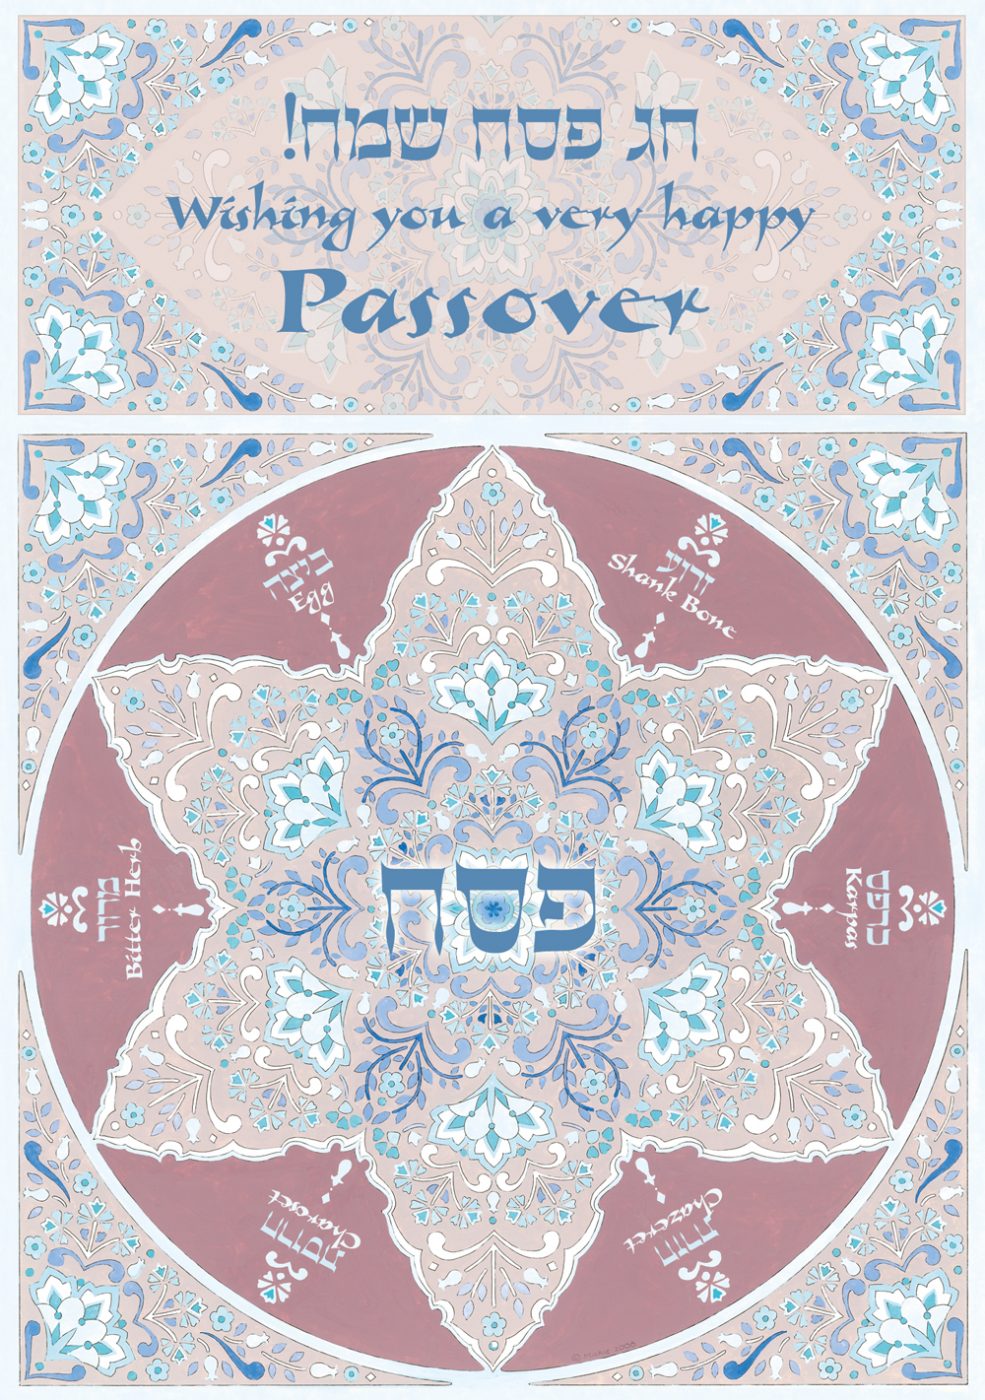 PS610 Passover Card